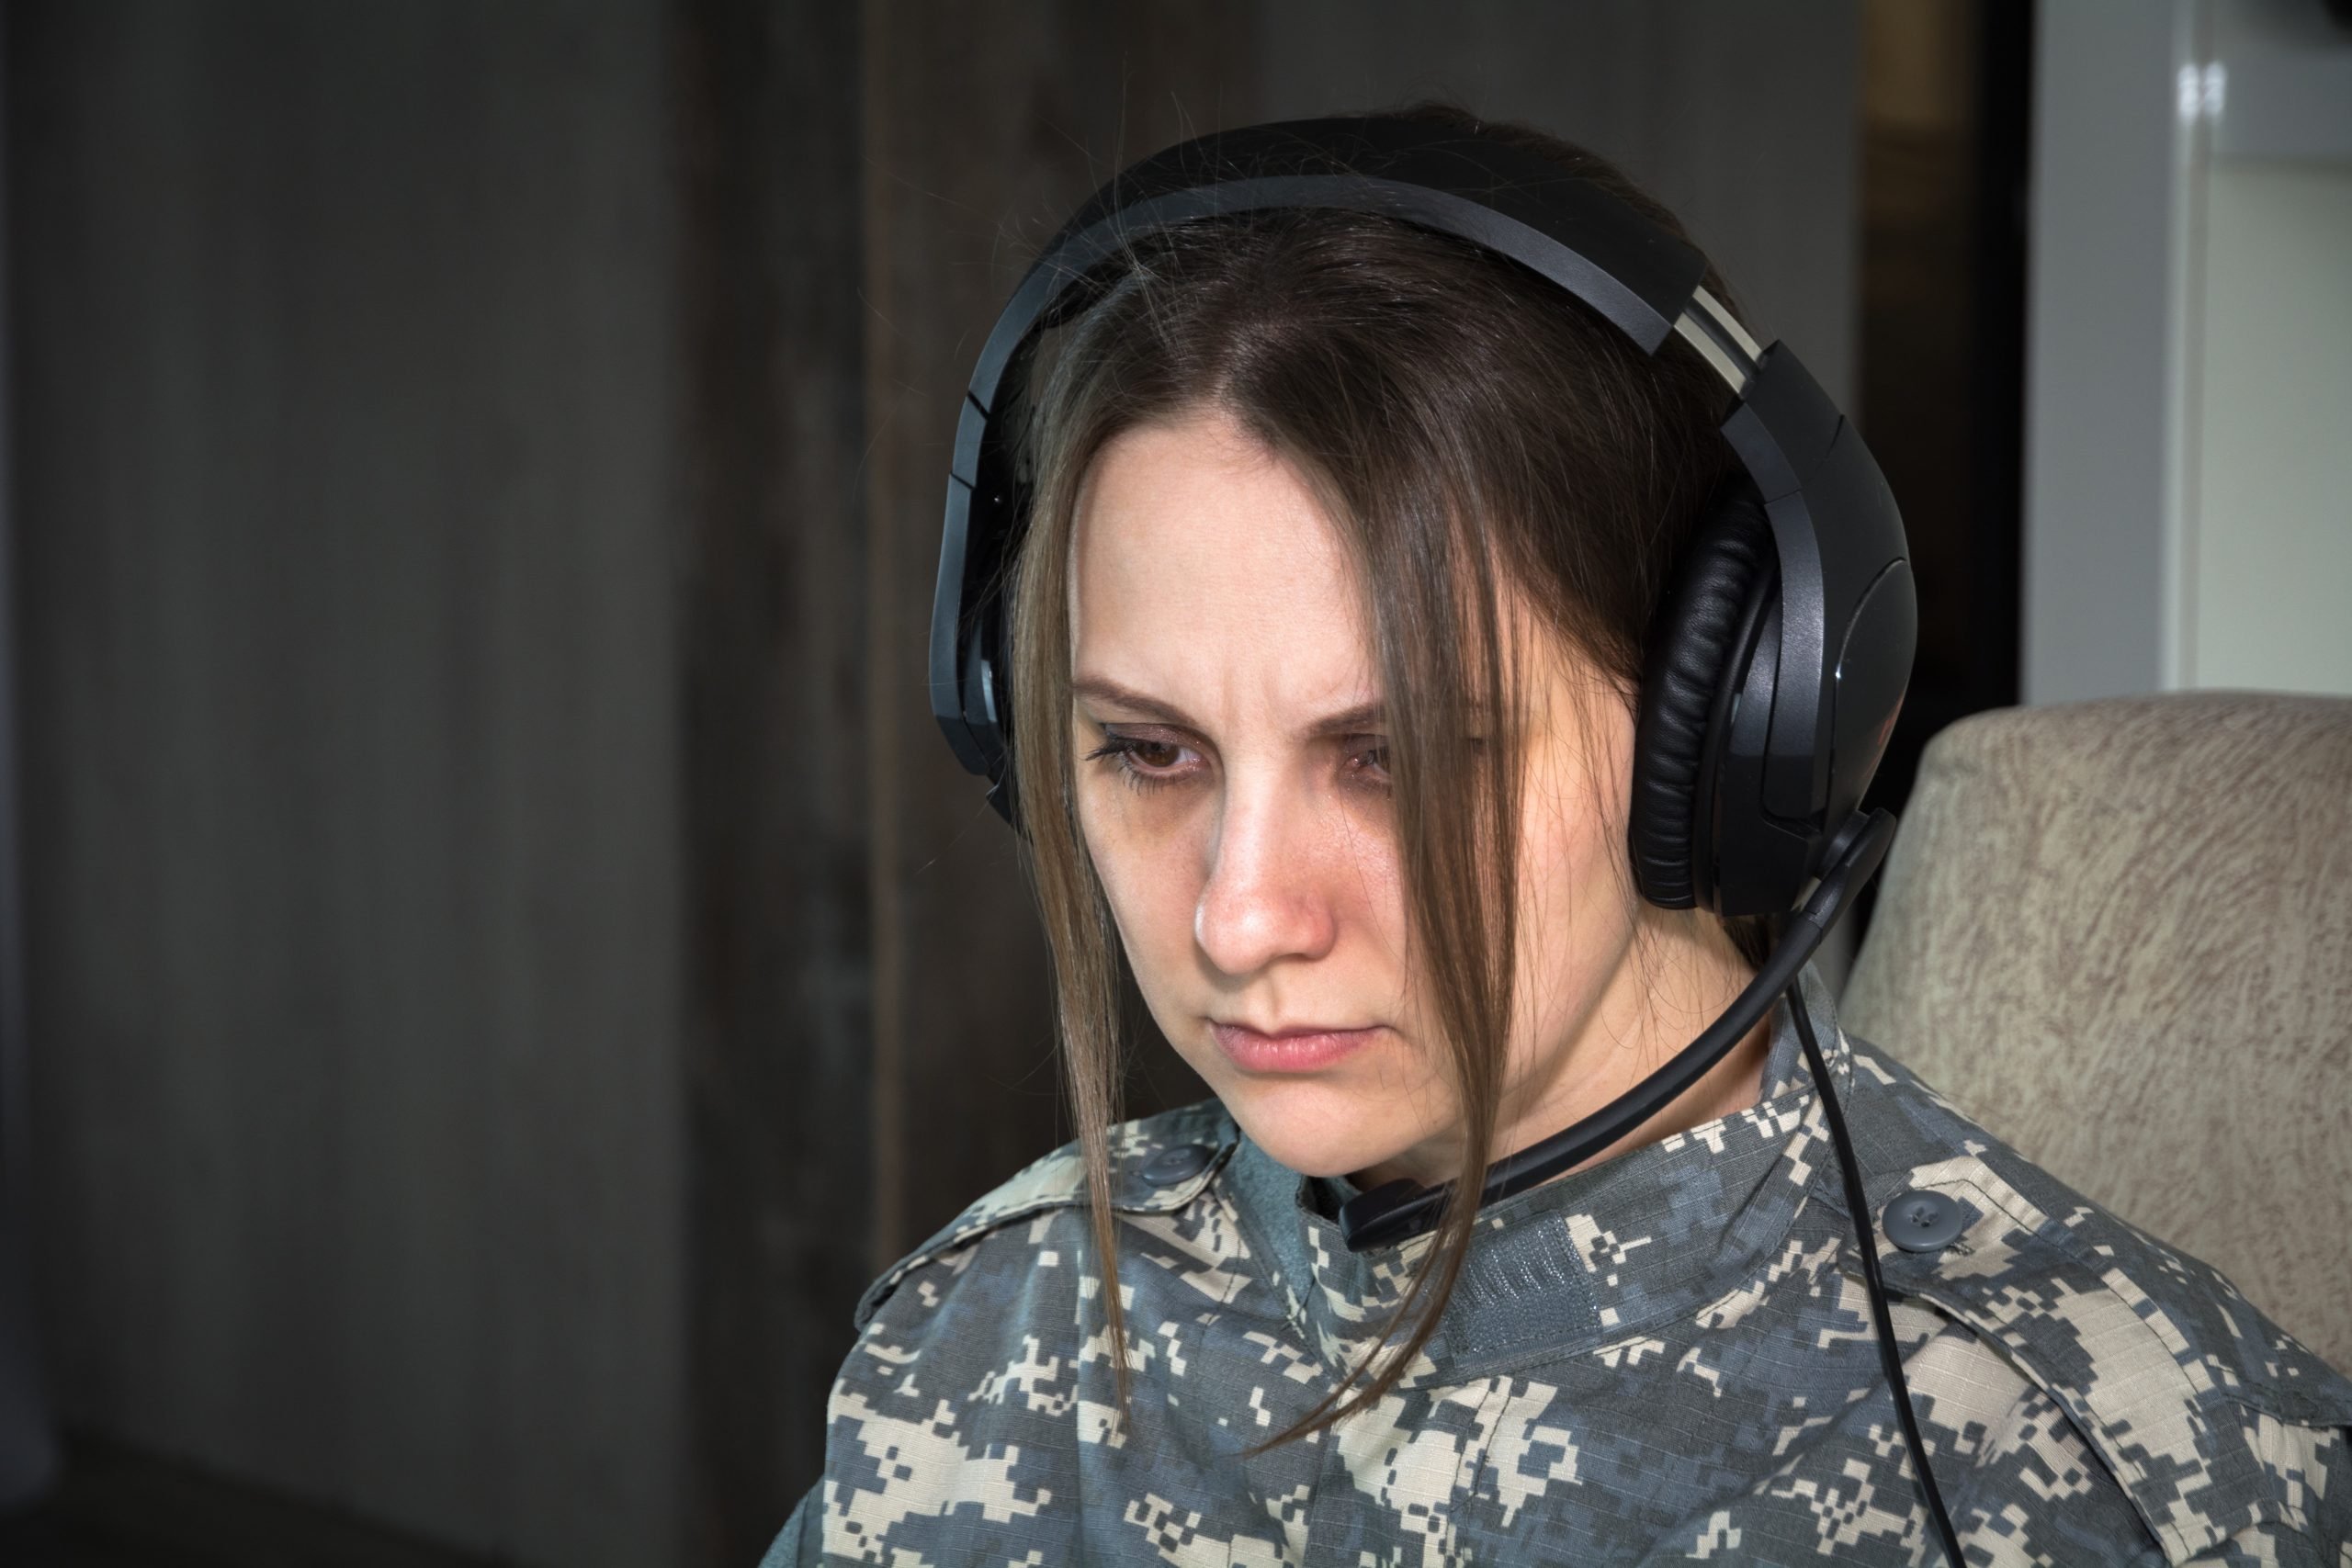 Woman frustrated while wearing headphones (From: Unsplash)